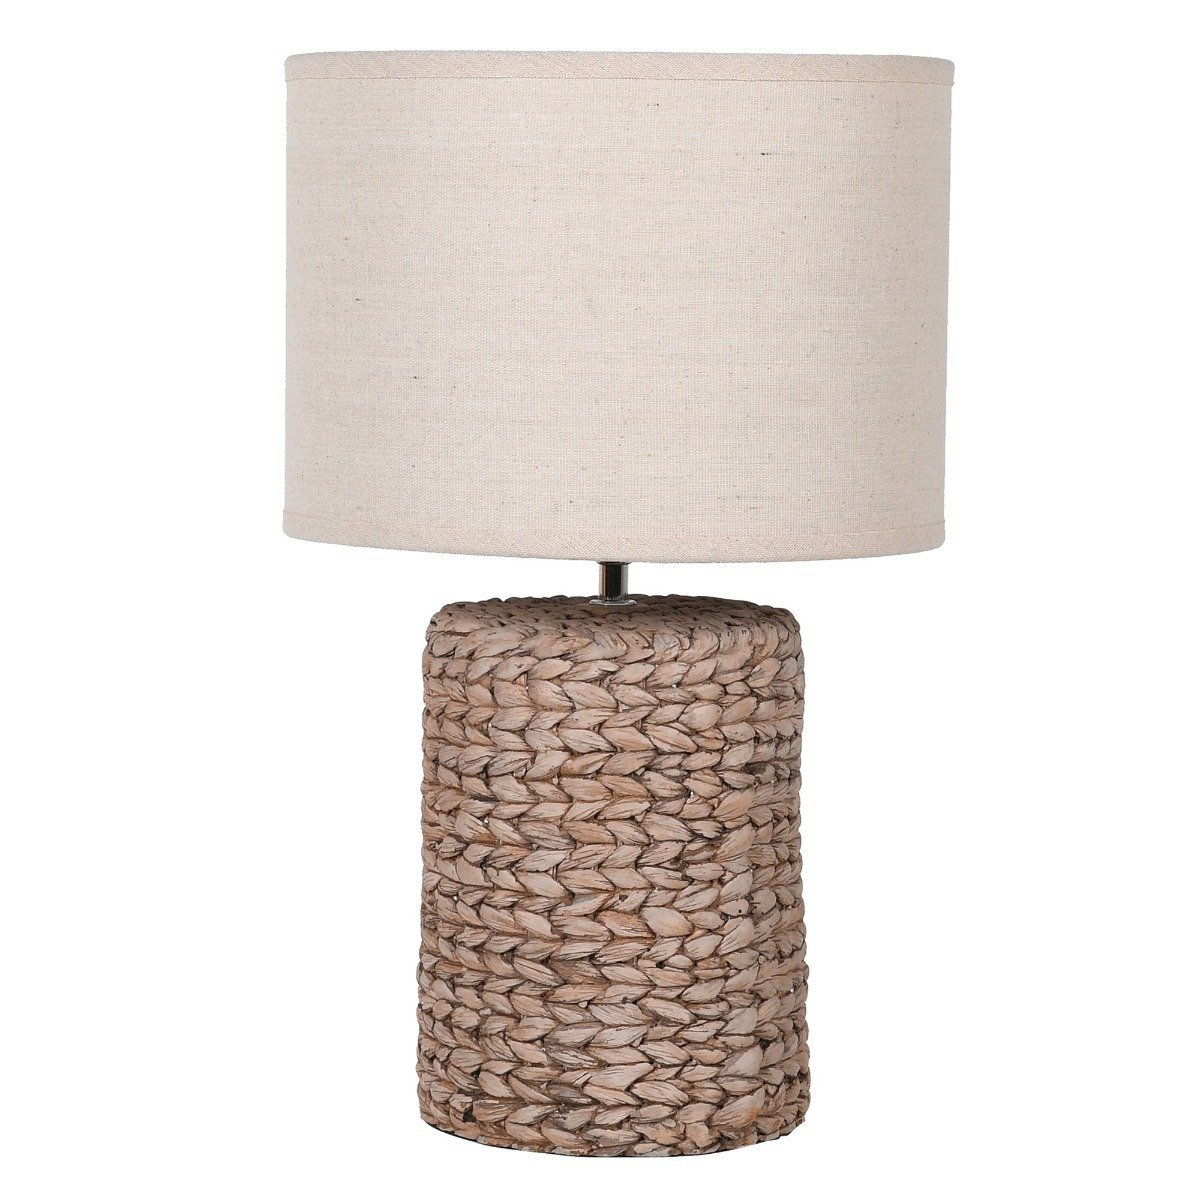 Rattan Table Lamp, Neutral Wood - Barker & Stonehouse - image 1